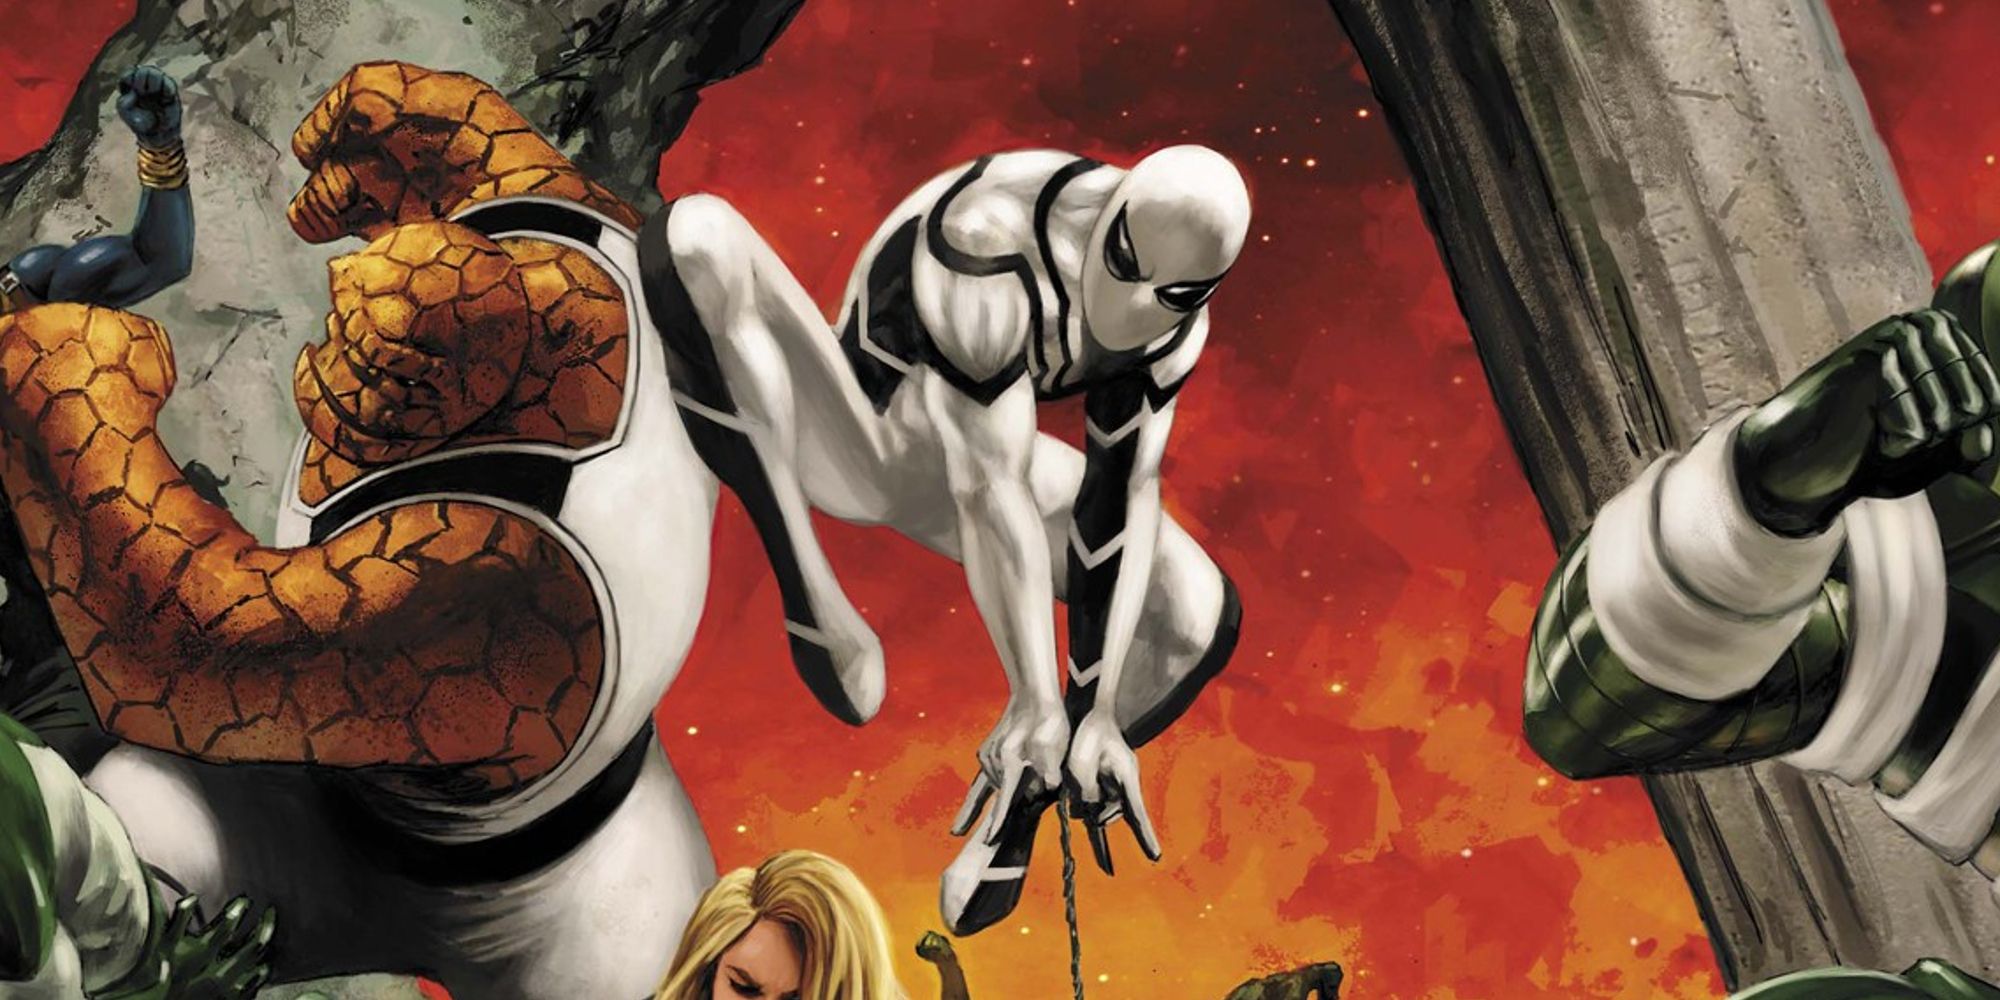 Spider-Man as part of the Future Foundation in Marvel Comics